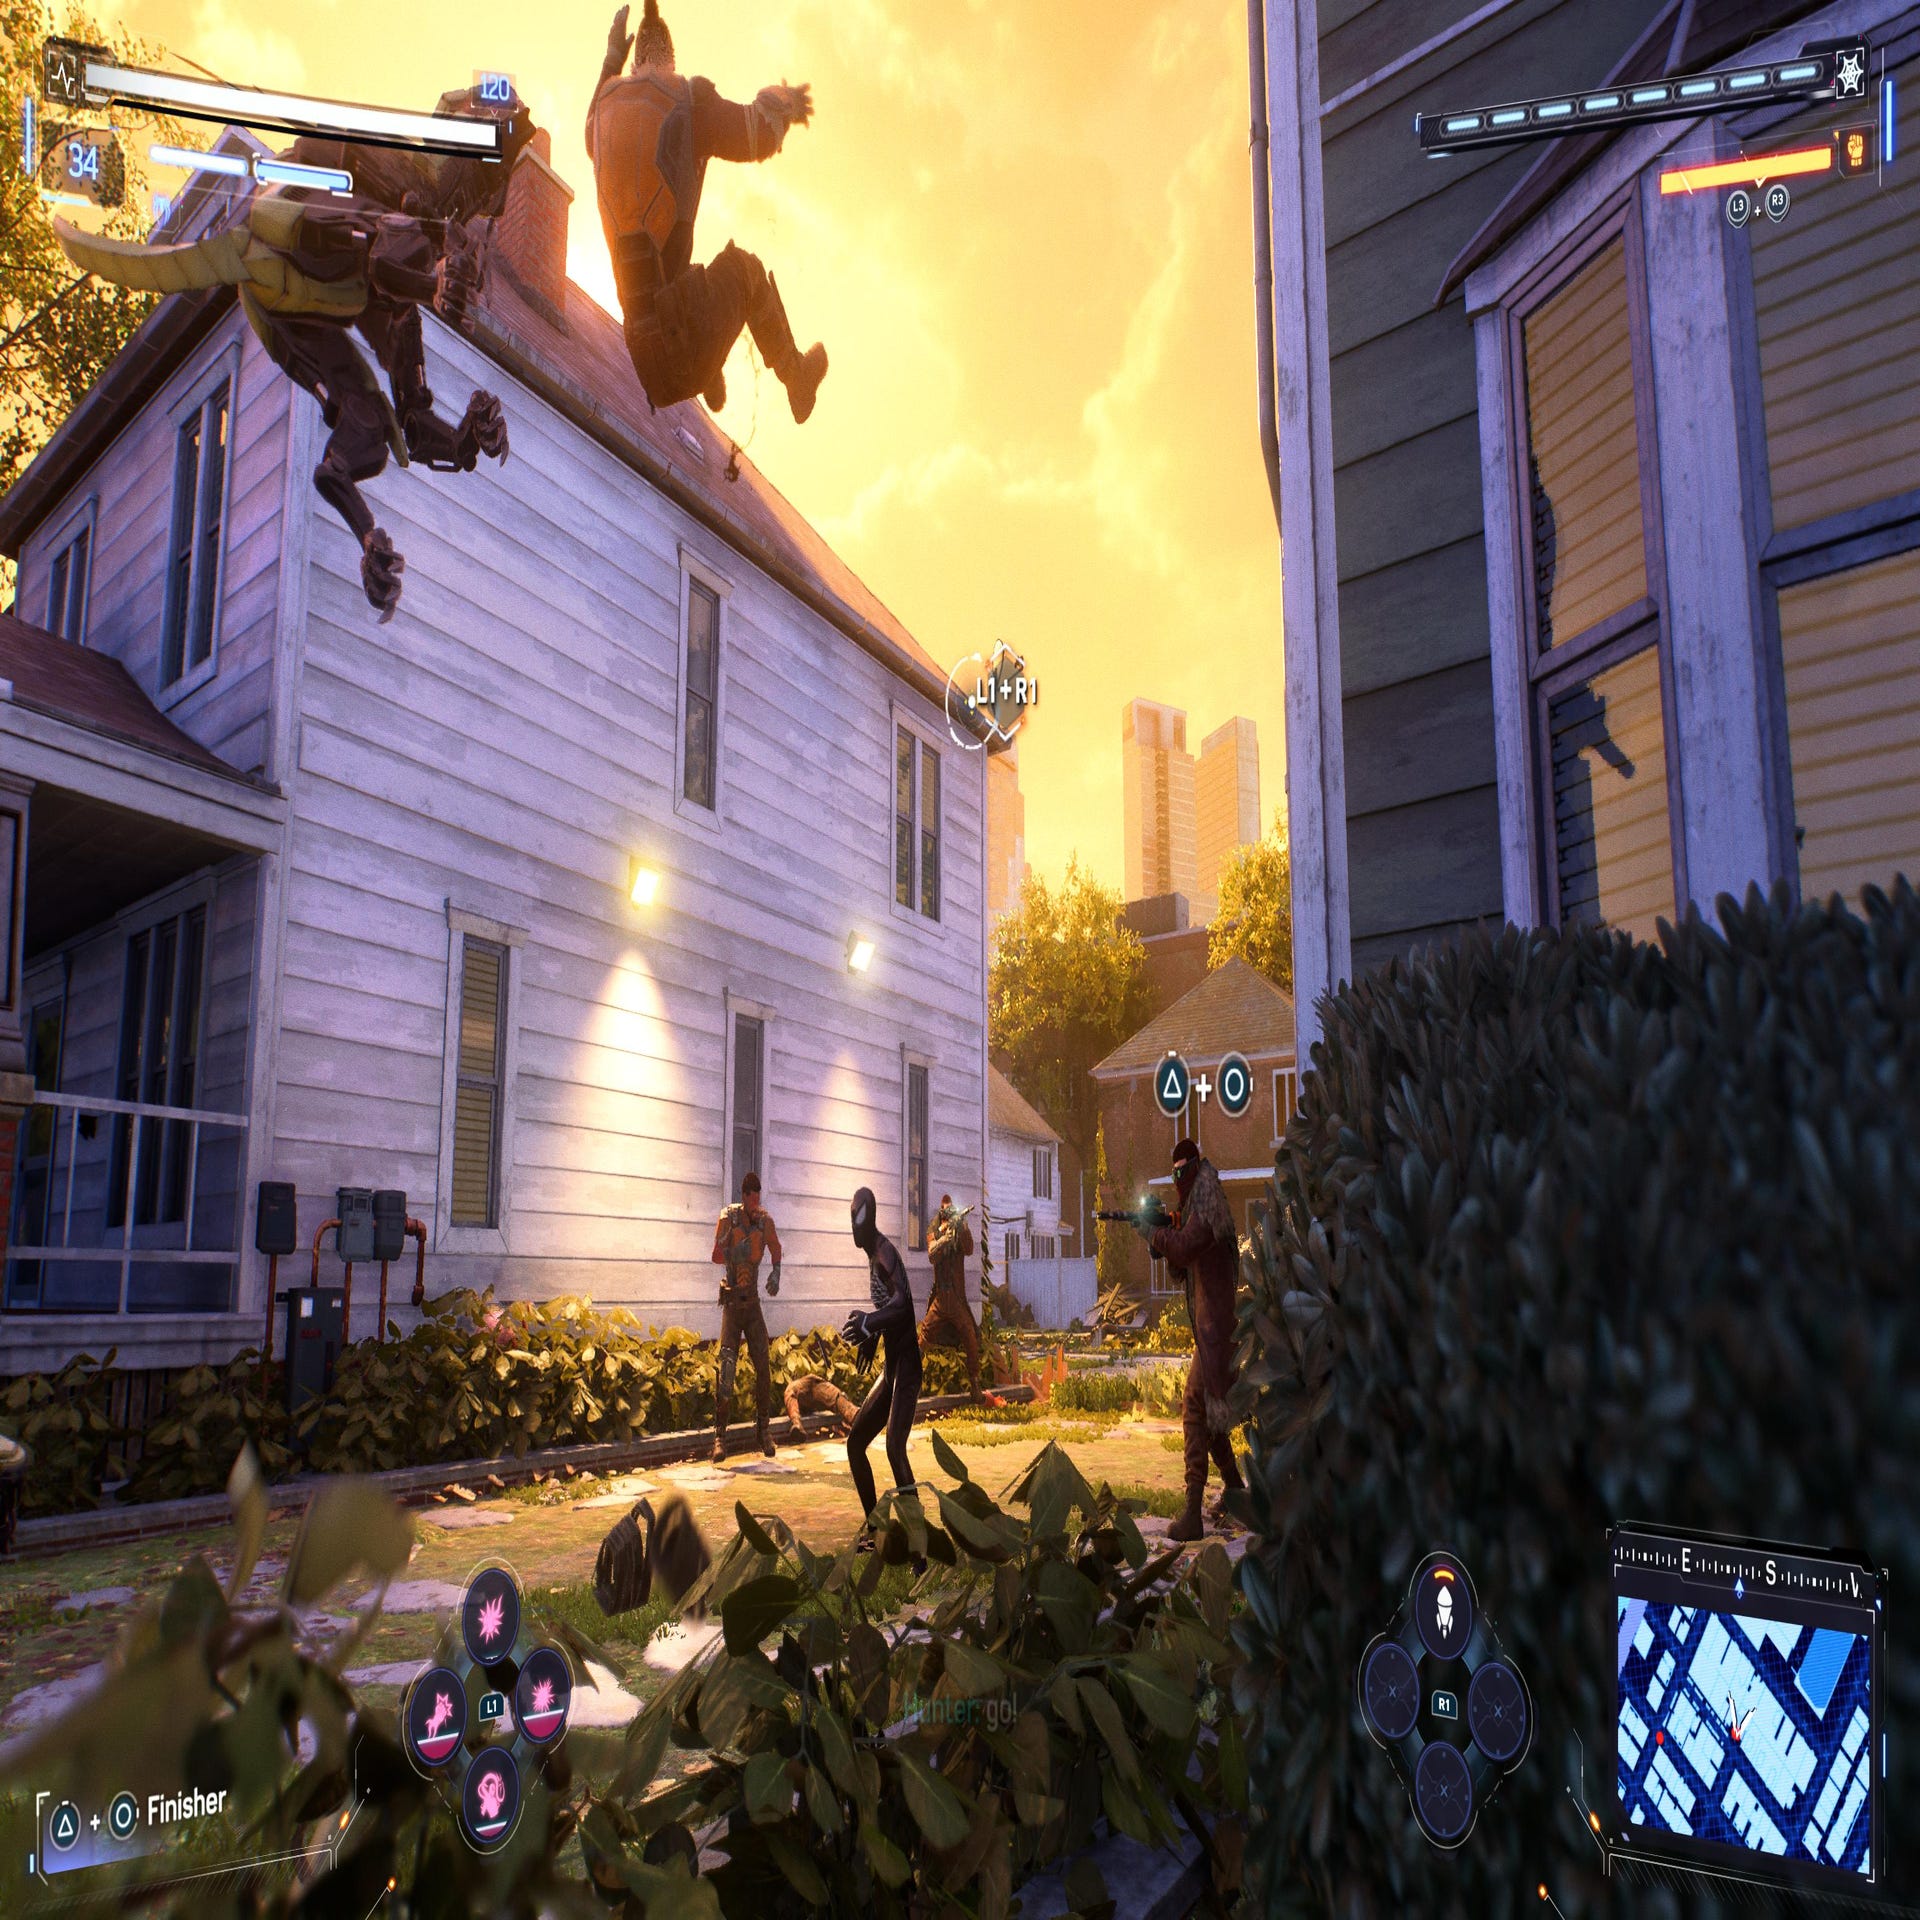 Marvel's Spider-Man 2 review: With great game comes great responsibility -  BusinessToday